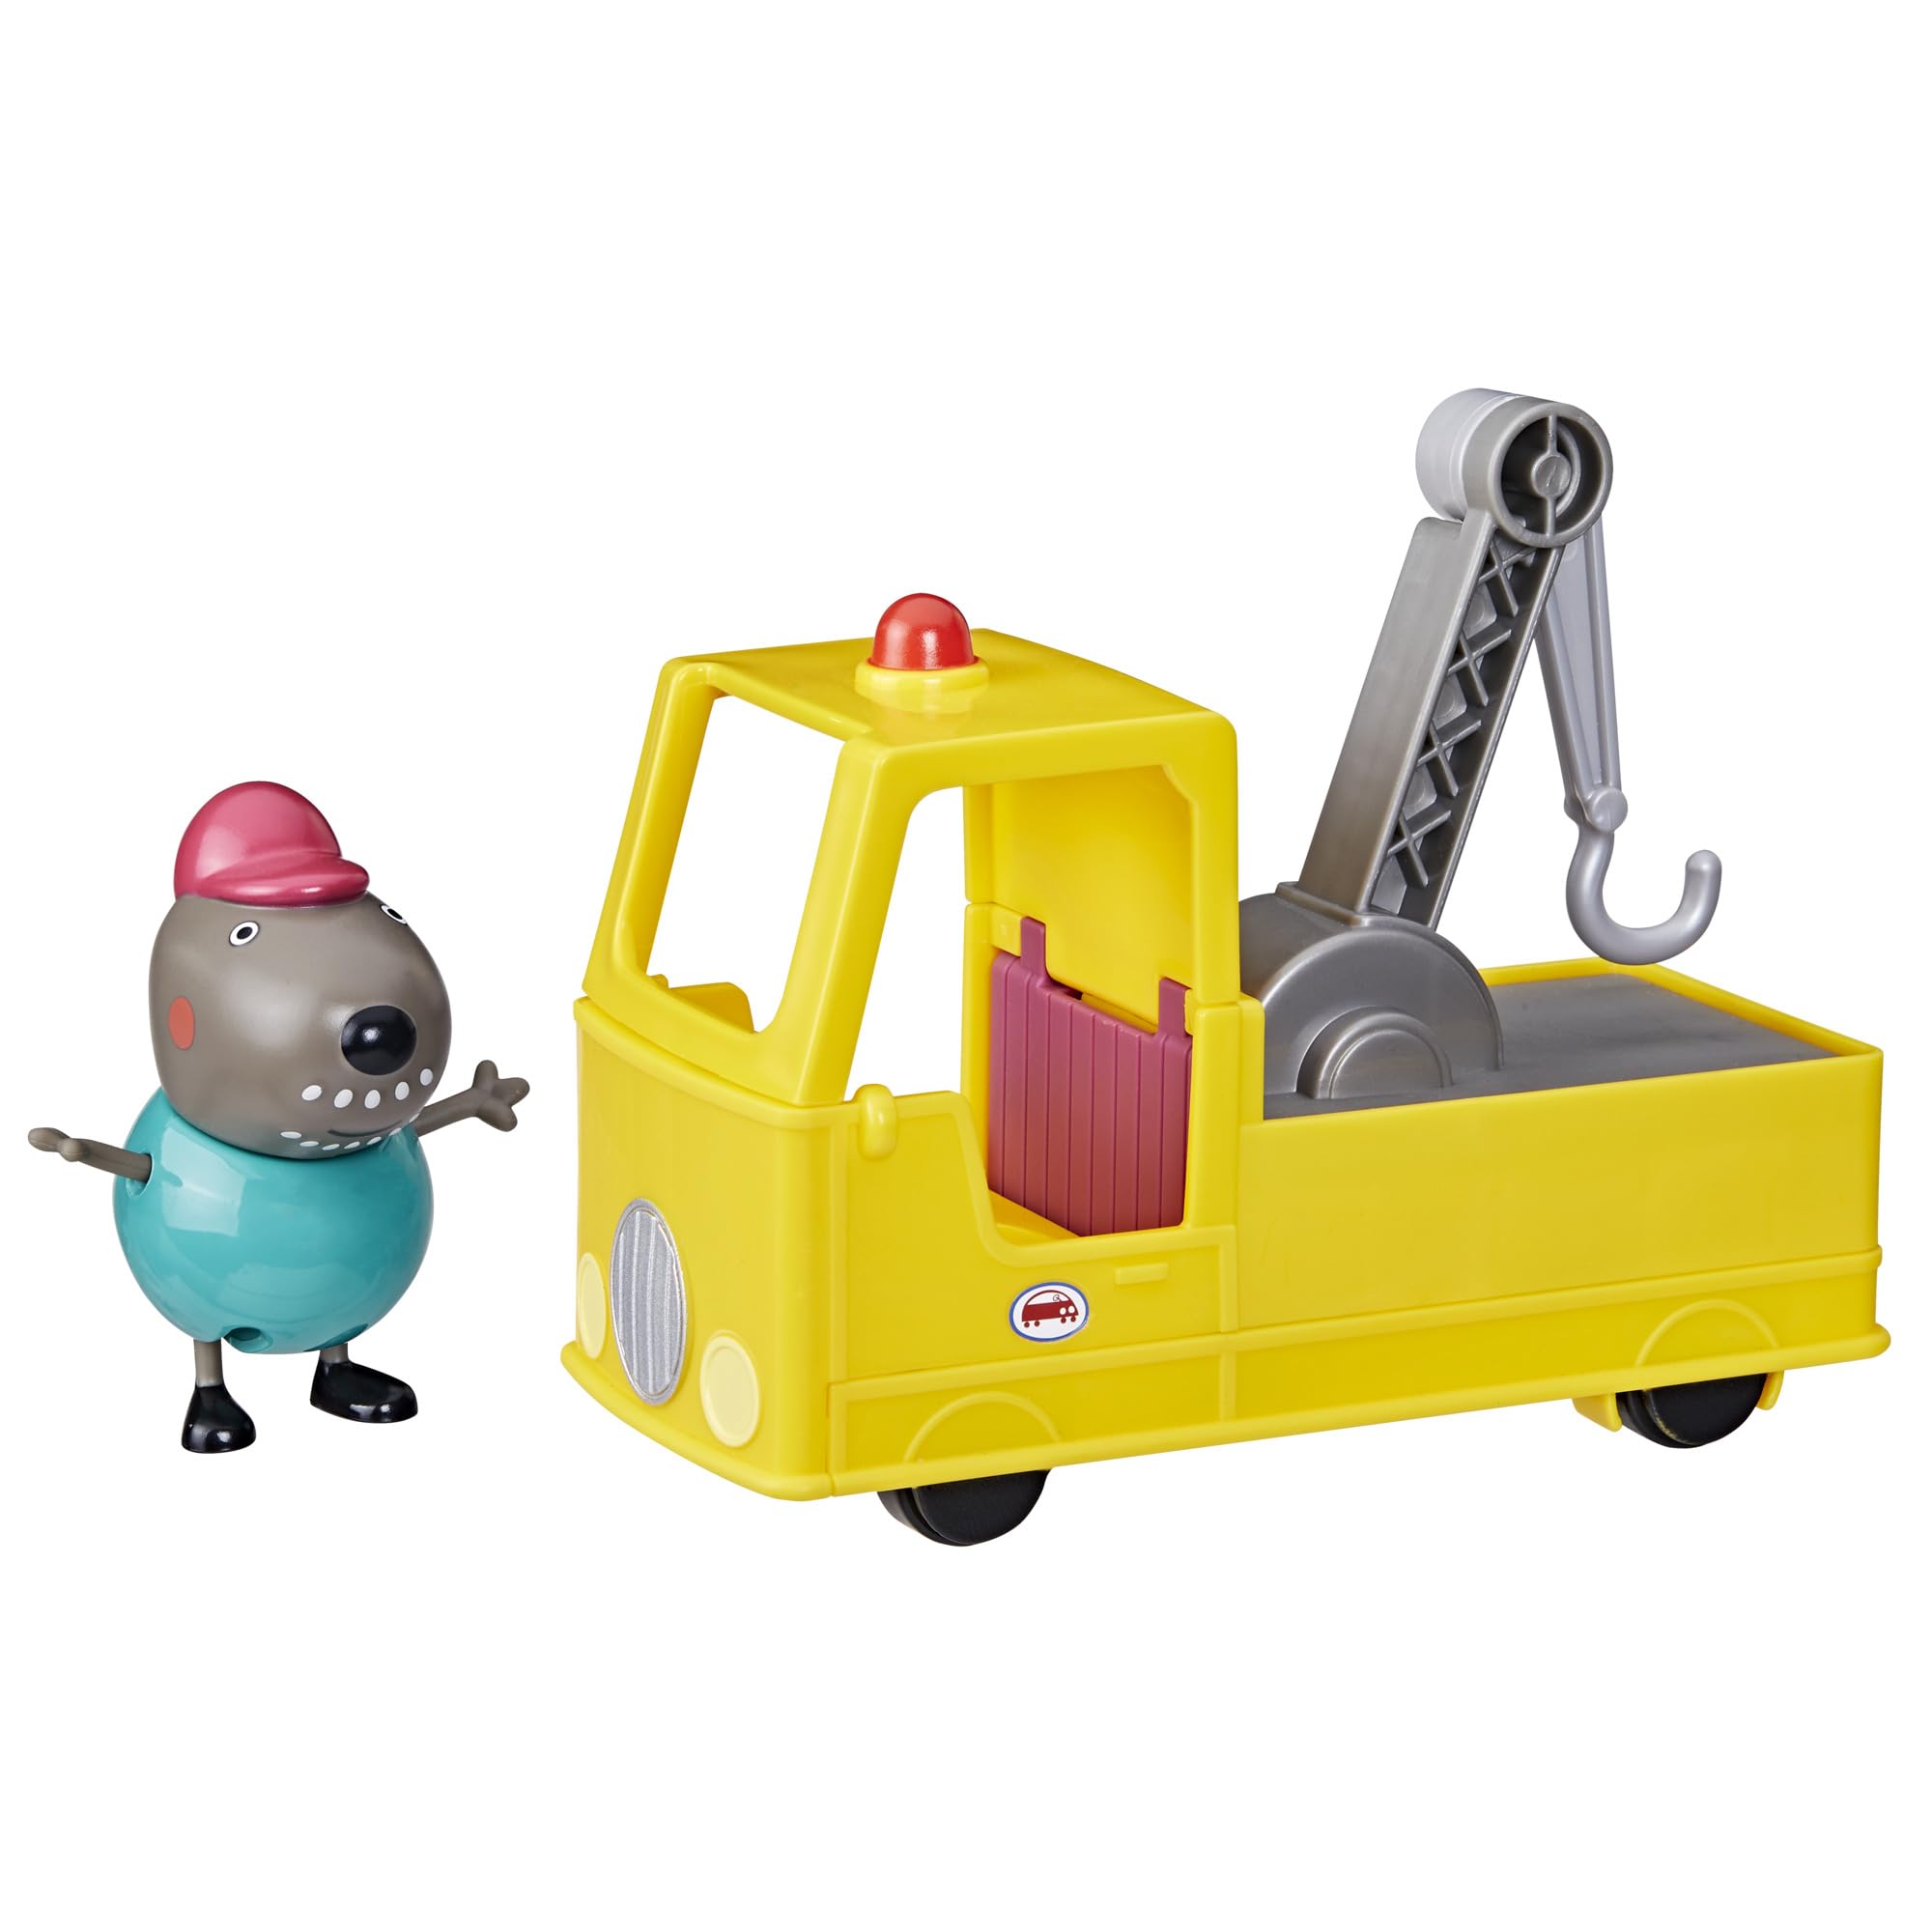 PEPPA PIG Granddad Dog's Tow Truck Construction Vehicle and Figure Set, Preschool Toys for Boys and Girls 3 Years and Up